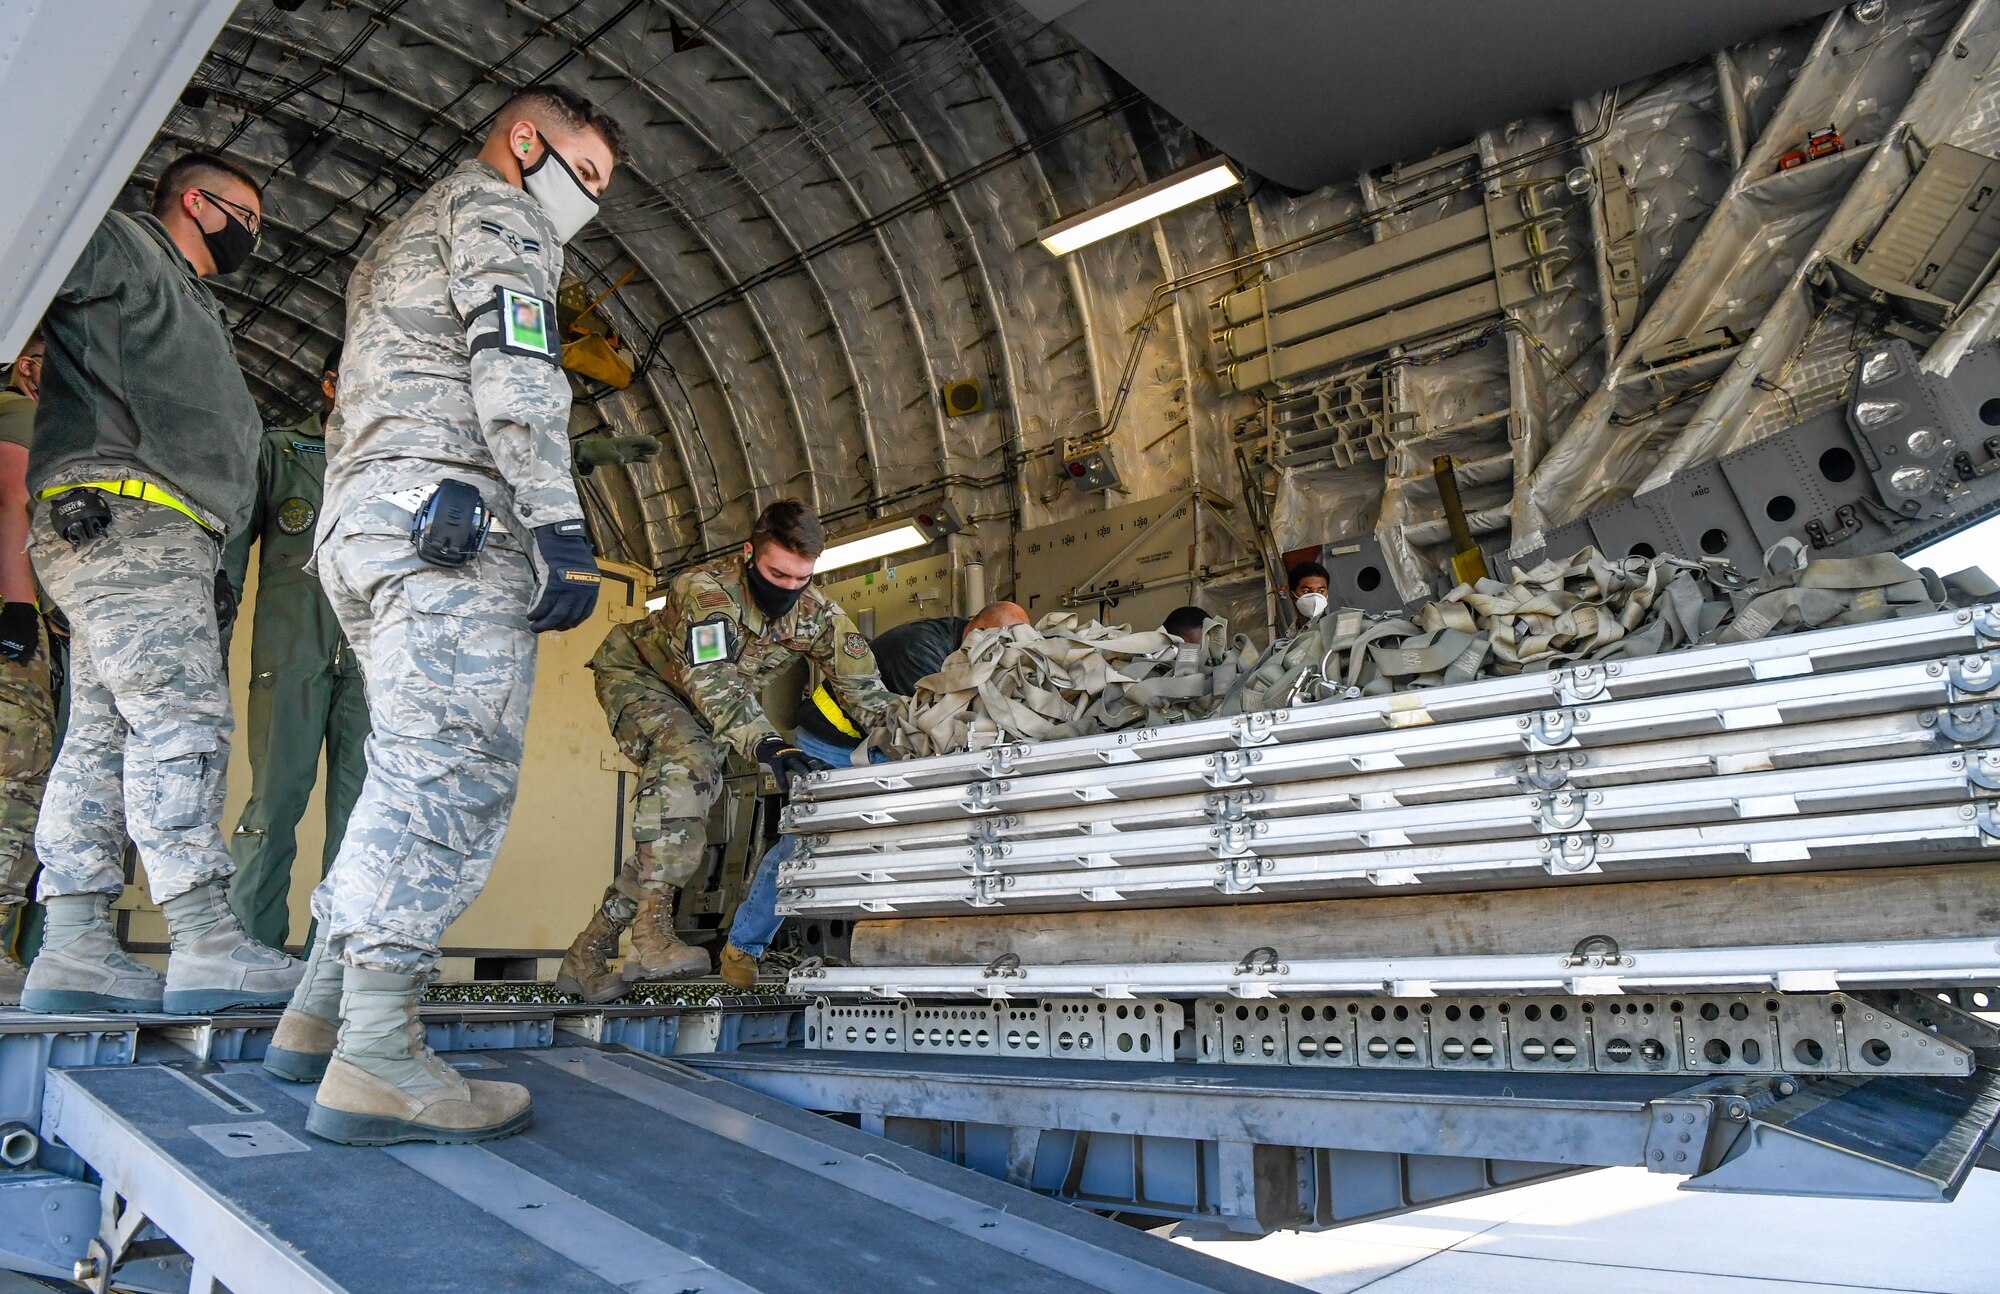 Airmen from the 436th Aerial Port Squadron unload cargo from an India air force C-17 Globemaster III at Dover Air Force Base, Delaware, Nov. 20, 2020. Dover AFB annually supports $3.5 billion worth of FMS operations due to its strategic location and 436th Aerial Port Squadron, the largest aerial port in the Department of Defense. The United States and India have shared interests in promoting global security, stability and economic prosperity. (U.S. Air Force photo by Senior Airman Christopher Quail) (This image was altered for security purposes by blurring identification badges)